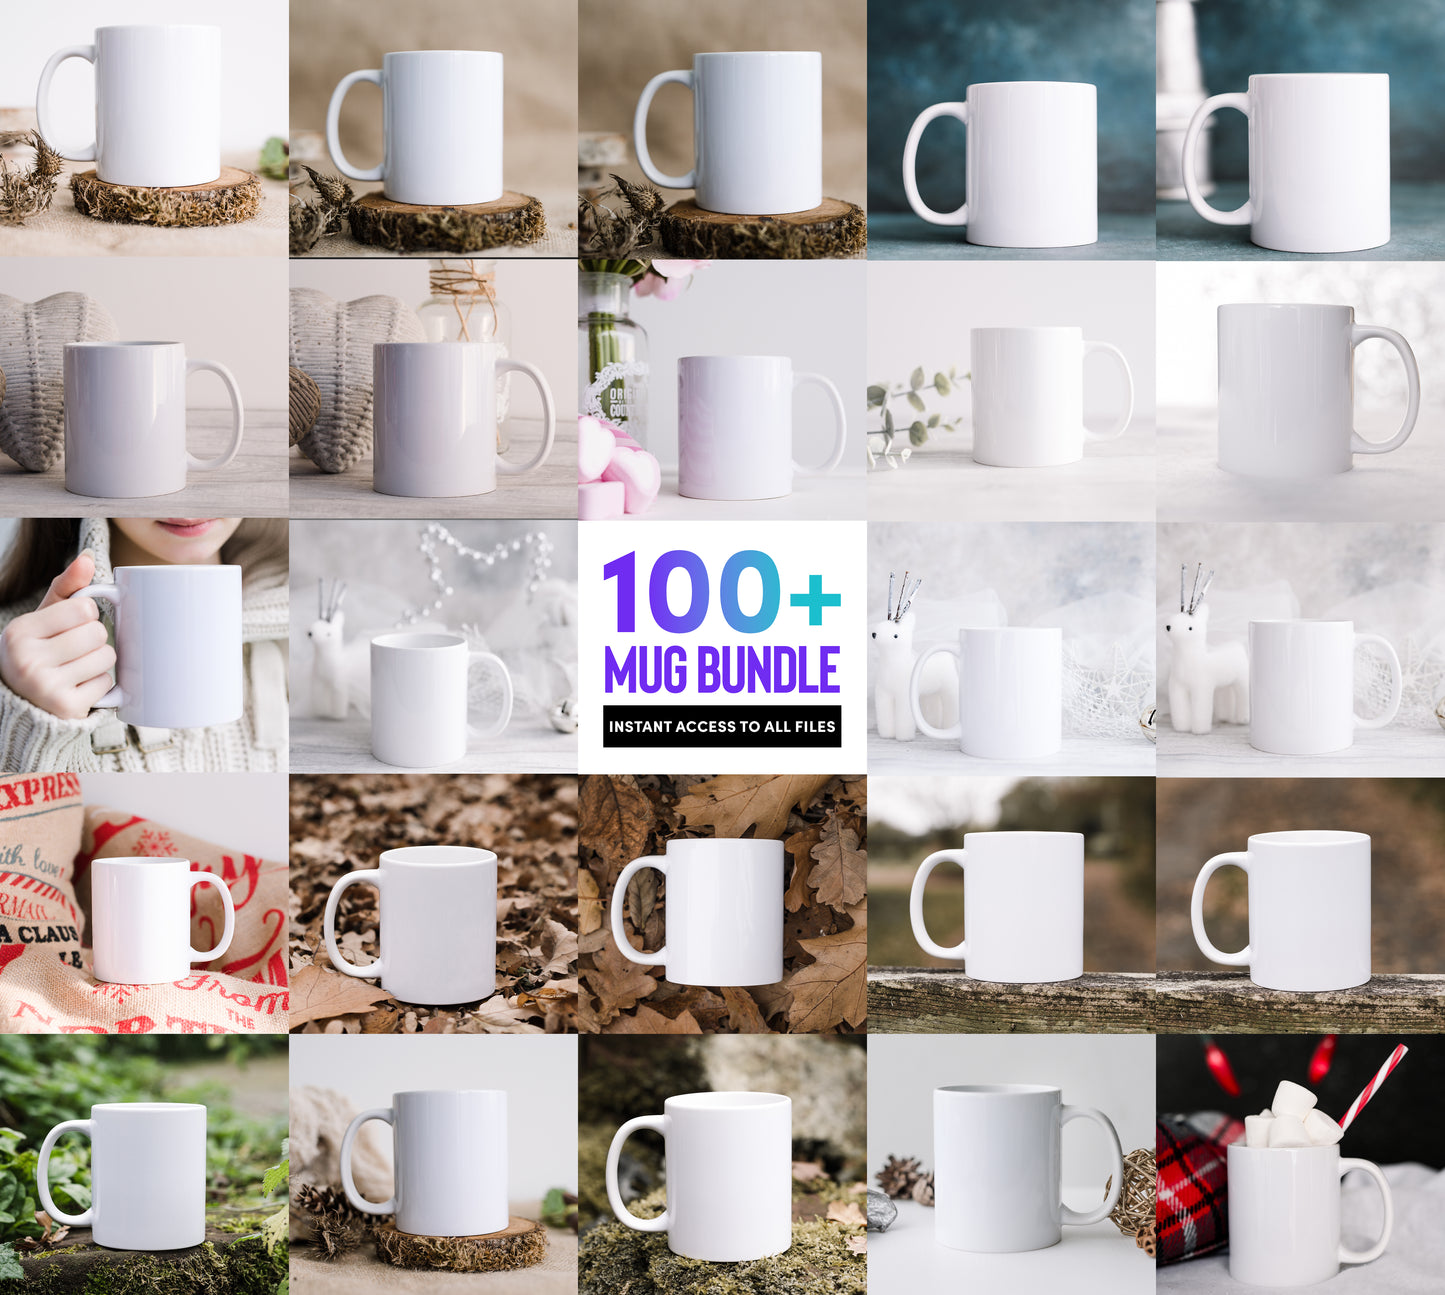 200+ Entire Shop Mockup Bundle, Tumblers, Clear Glass Can, Video Mockups, 40 Oz Tumbler Mockups, Mugs mockups, Tote Bags and more